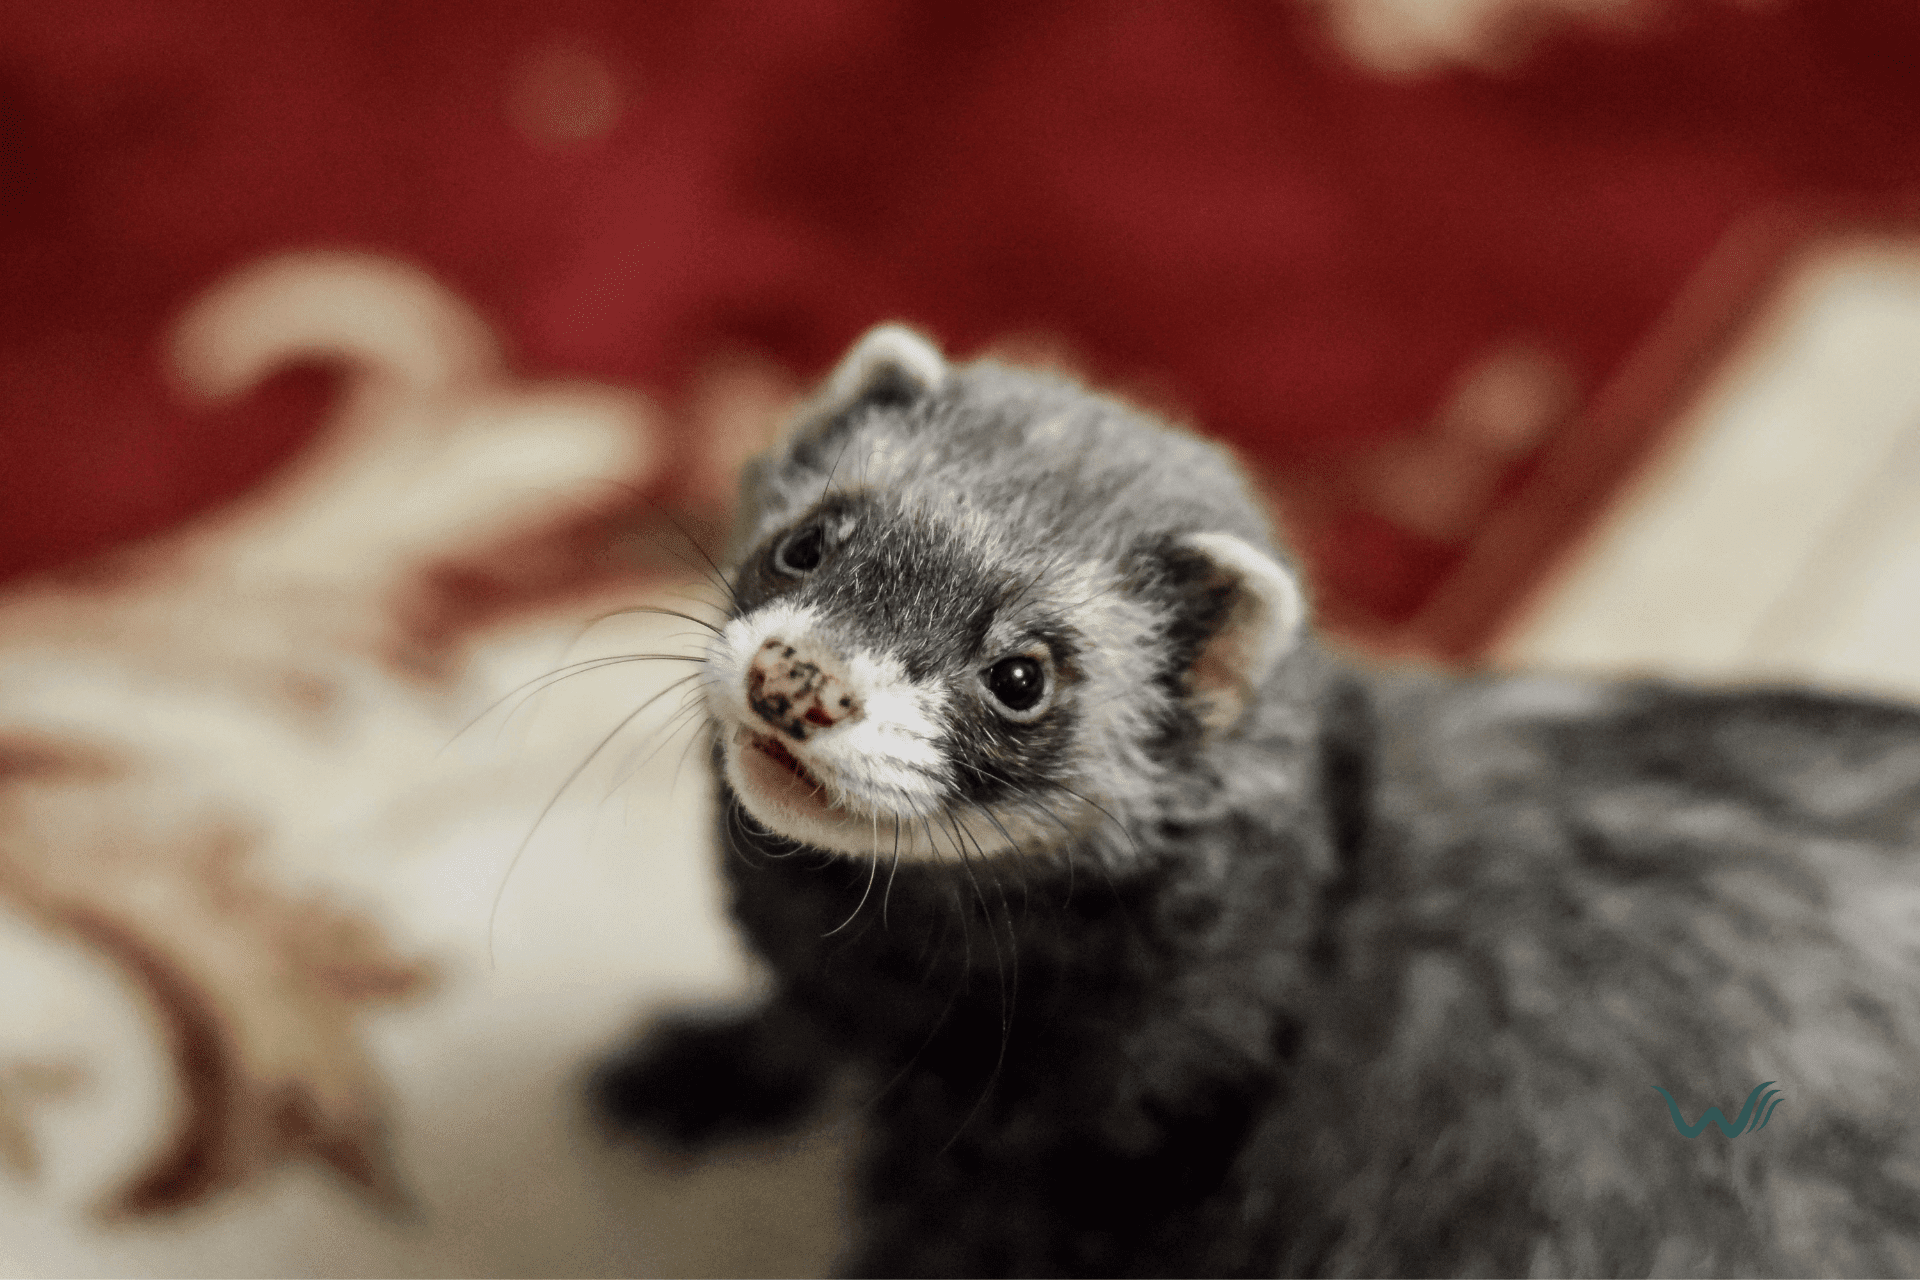 can a ferret be an emotional support animal